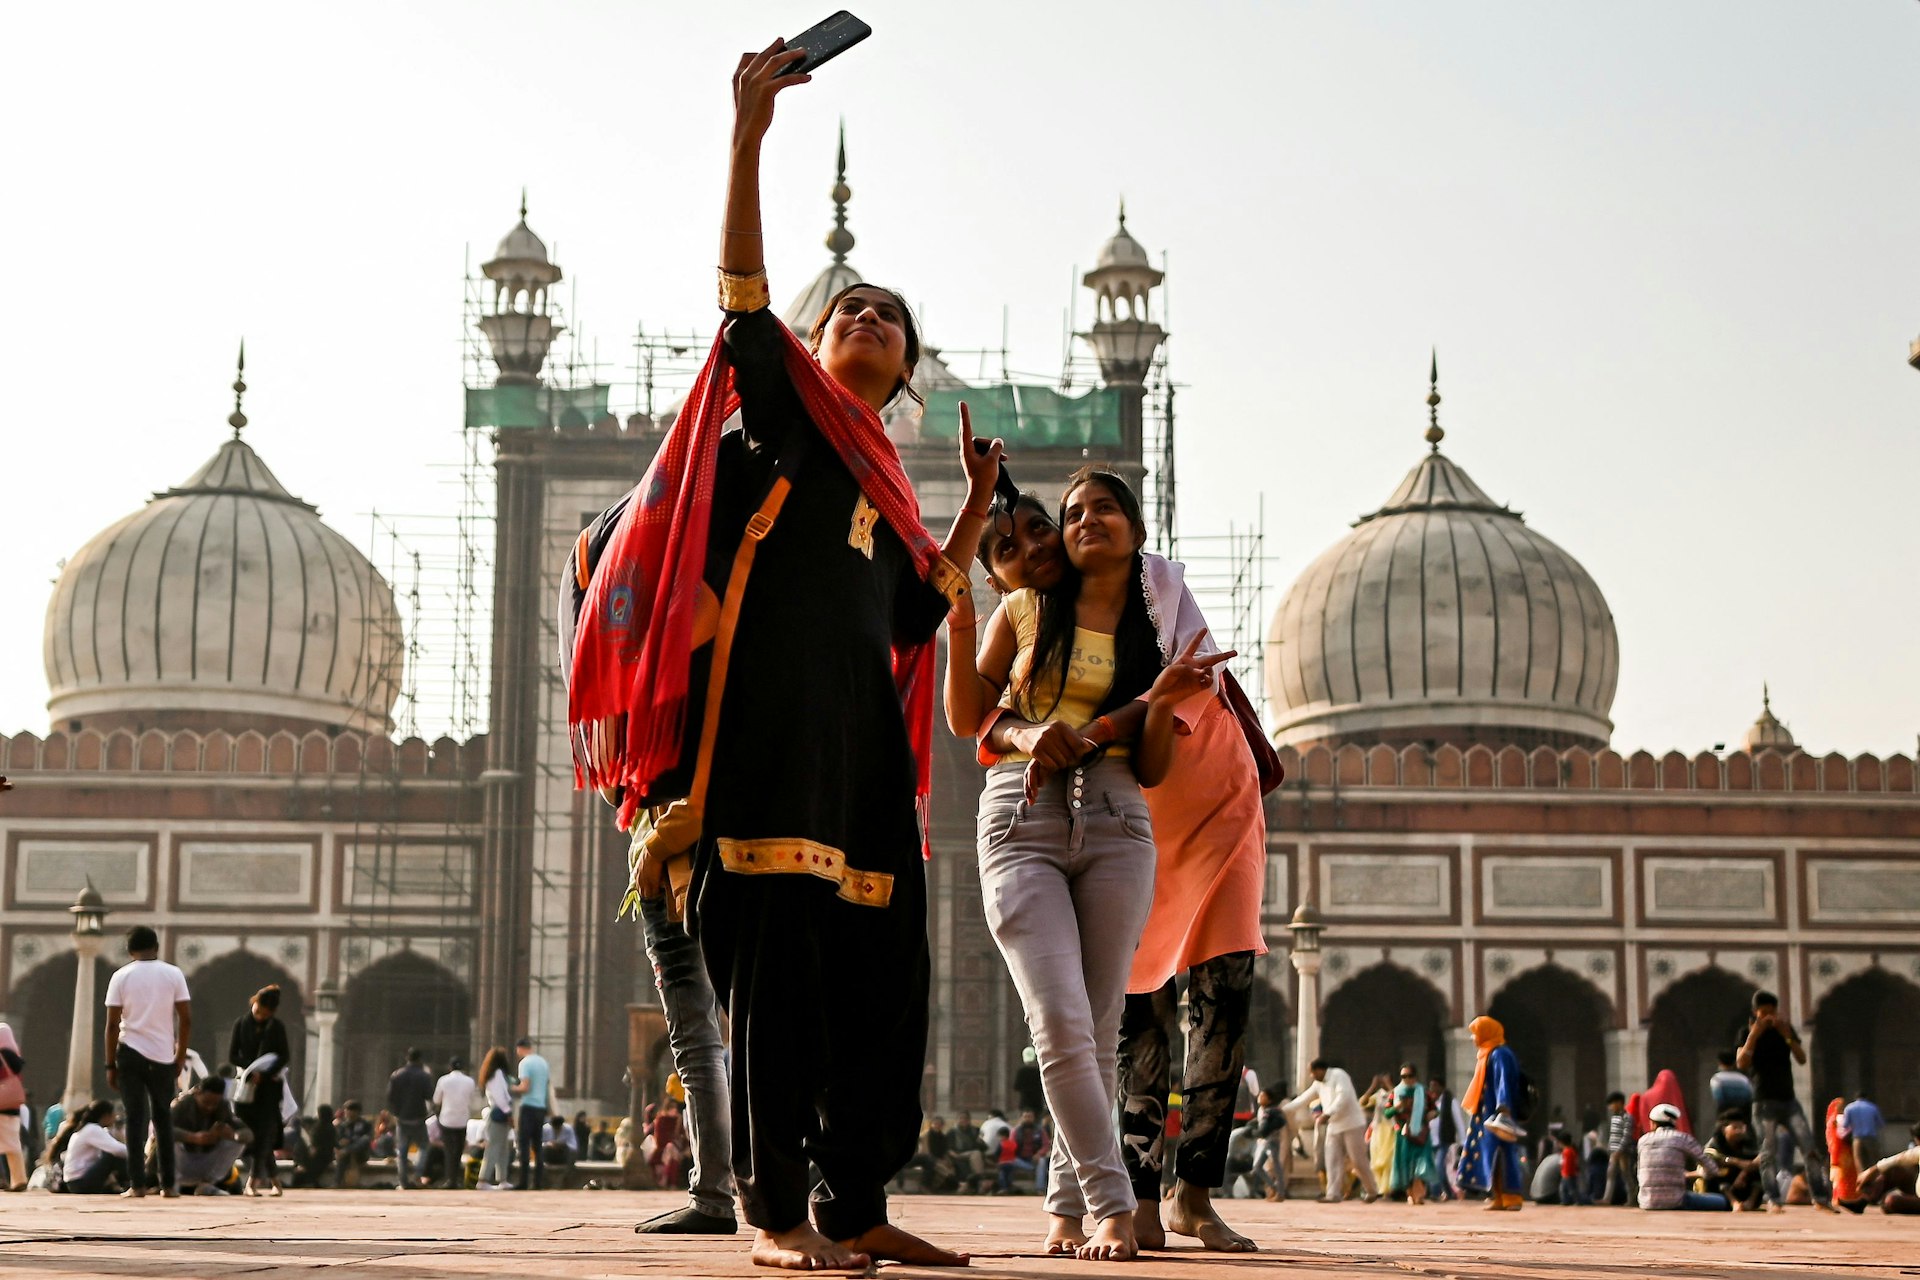 A woman with children takes a selfie at Jama Masjid, Delhi, India